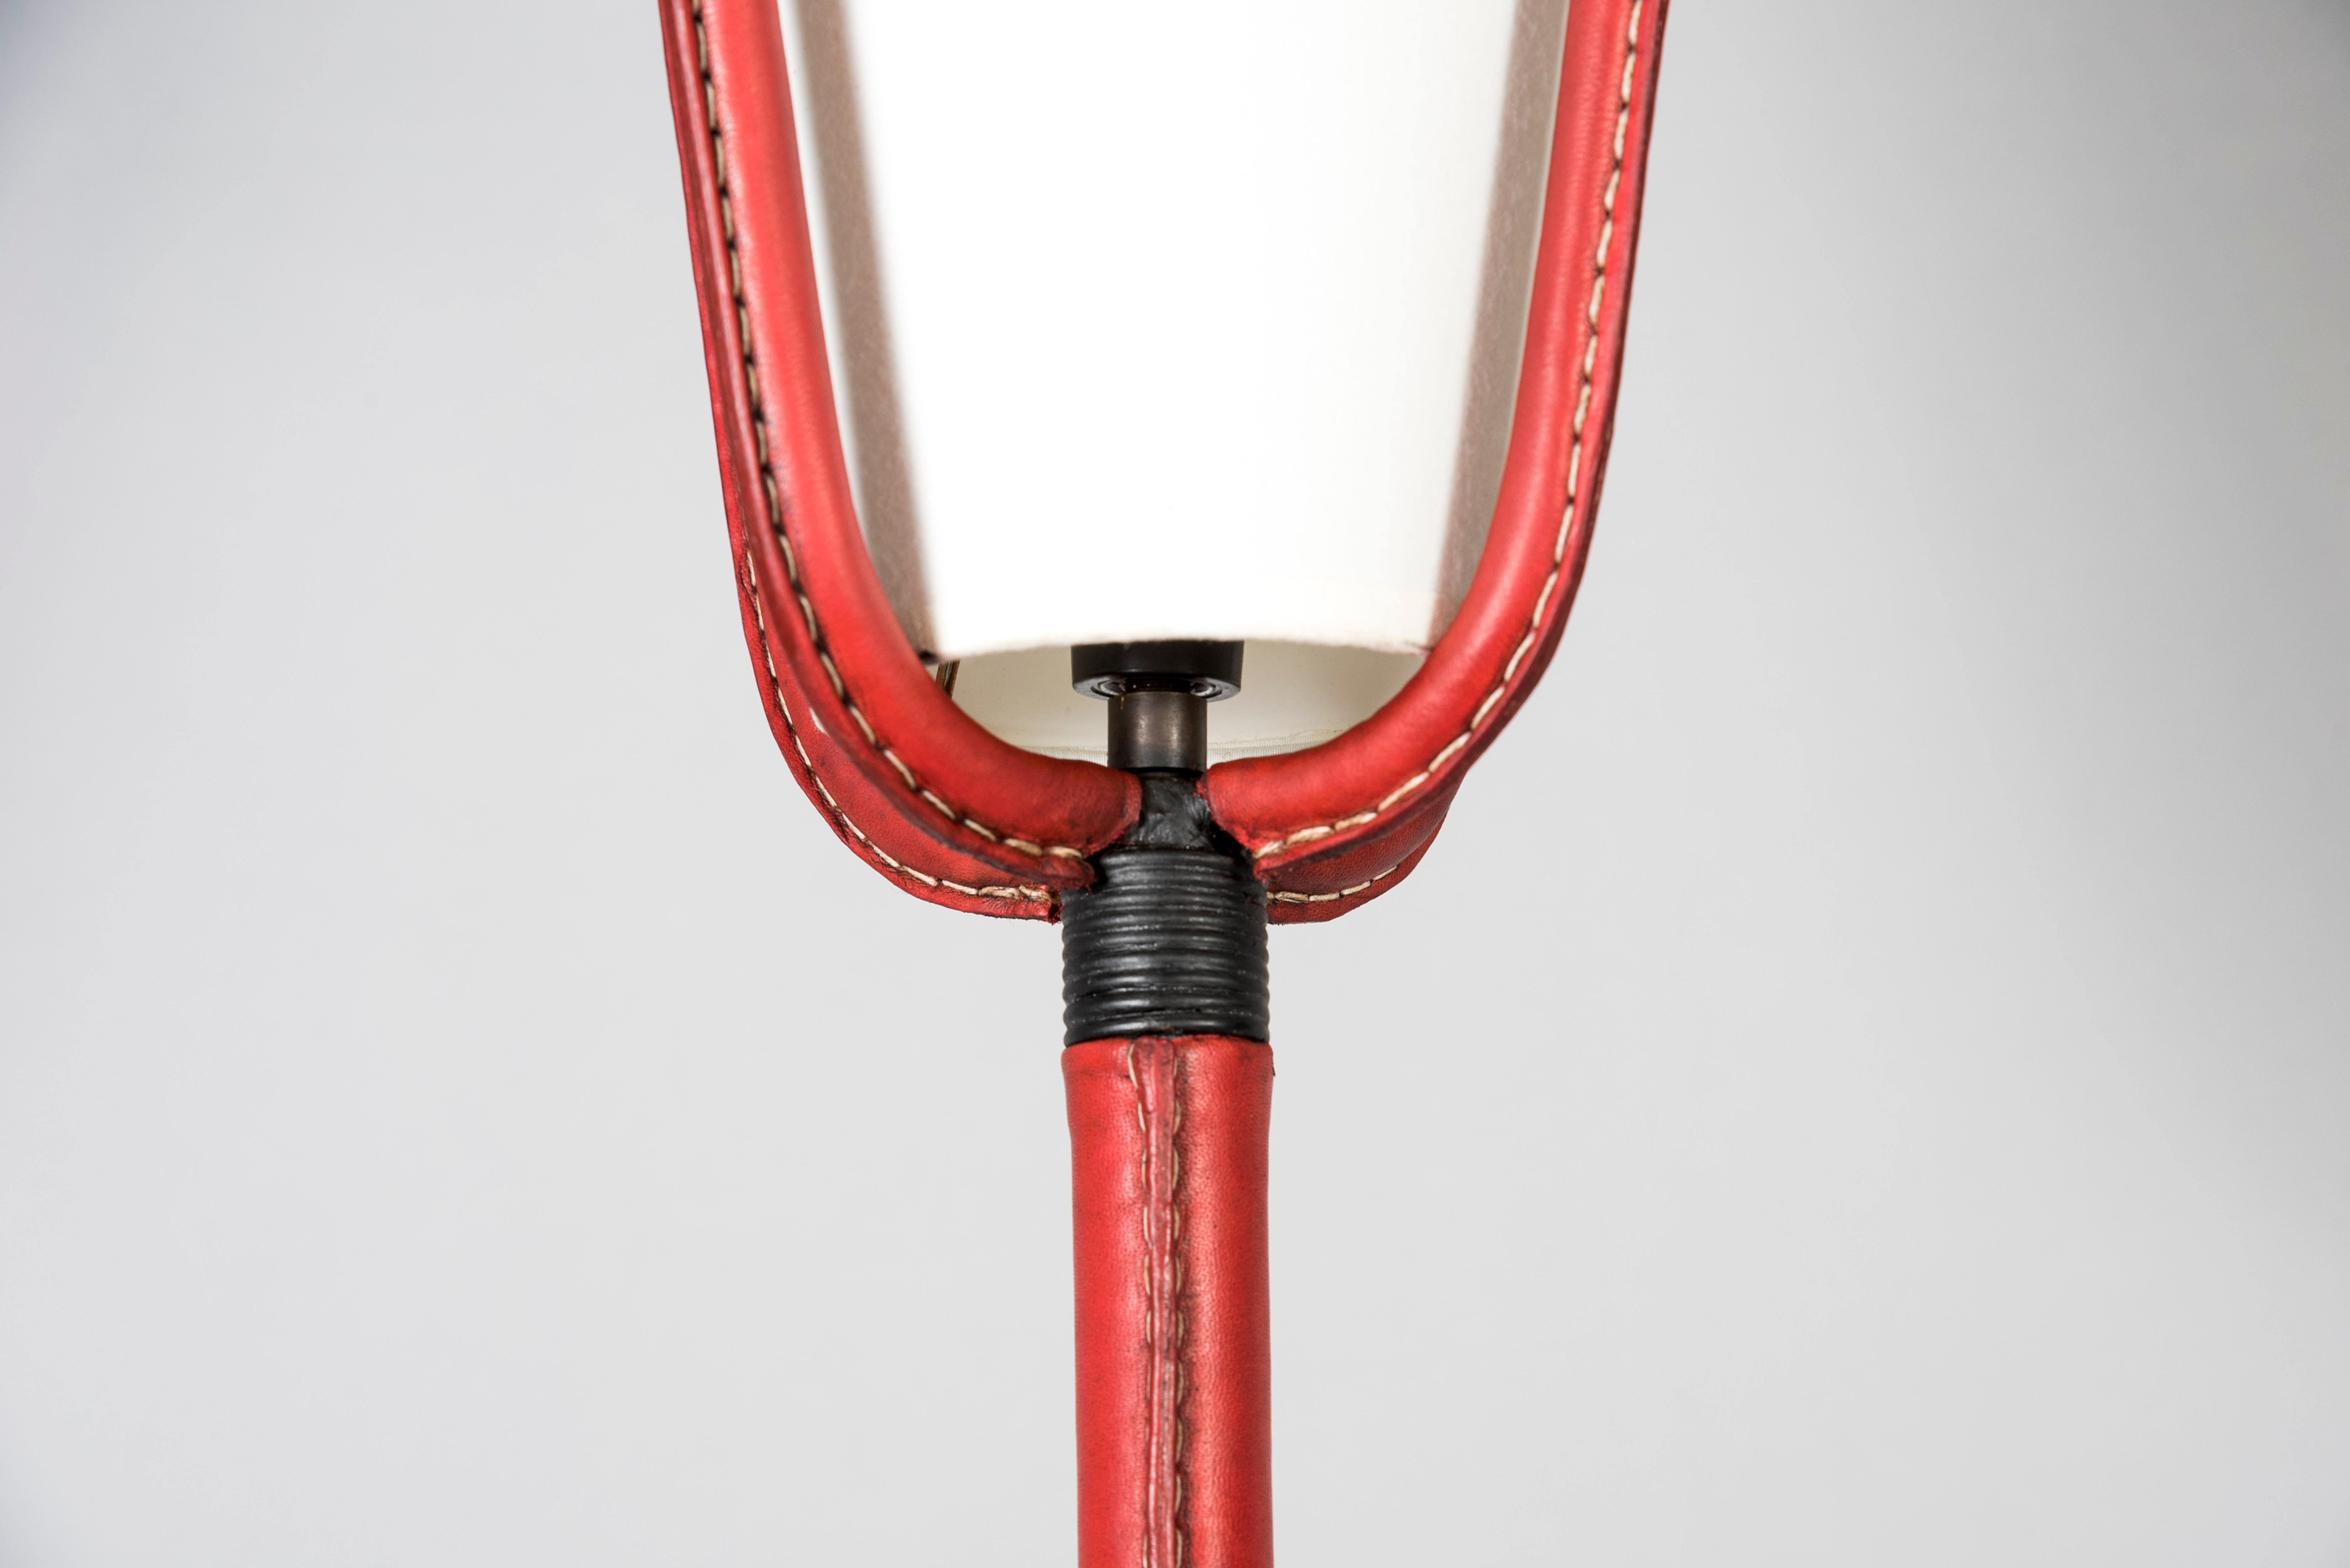 1950's Stitched Leather Floor Lamp by Jacques Adnet For Sale 1